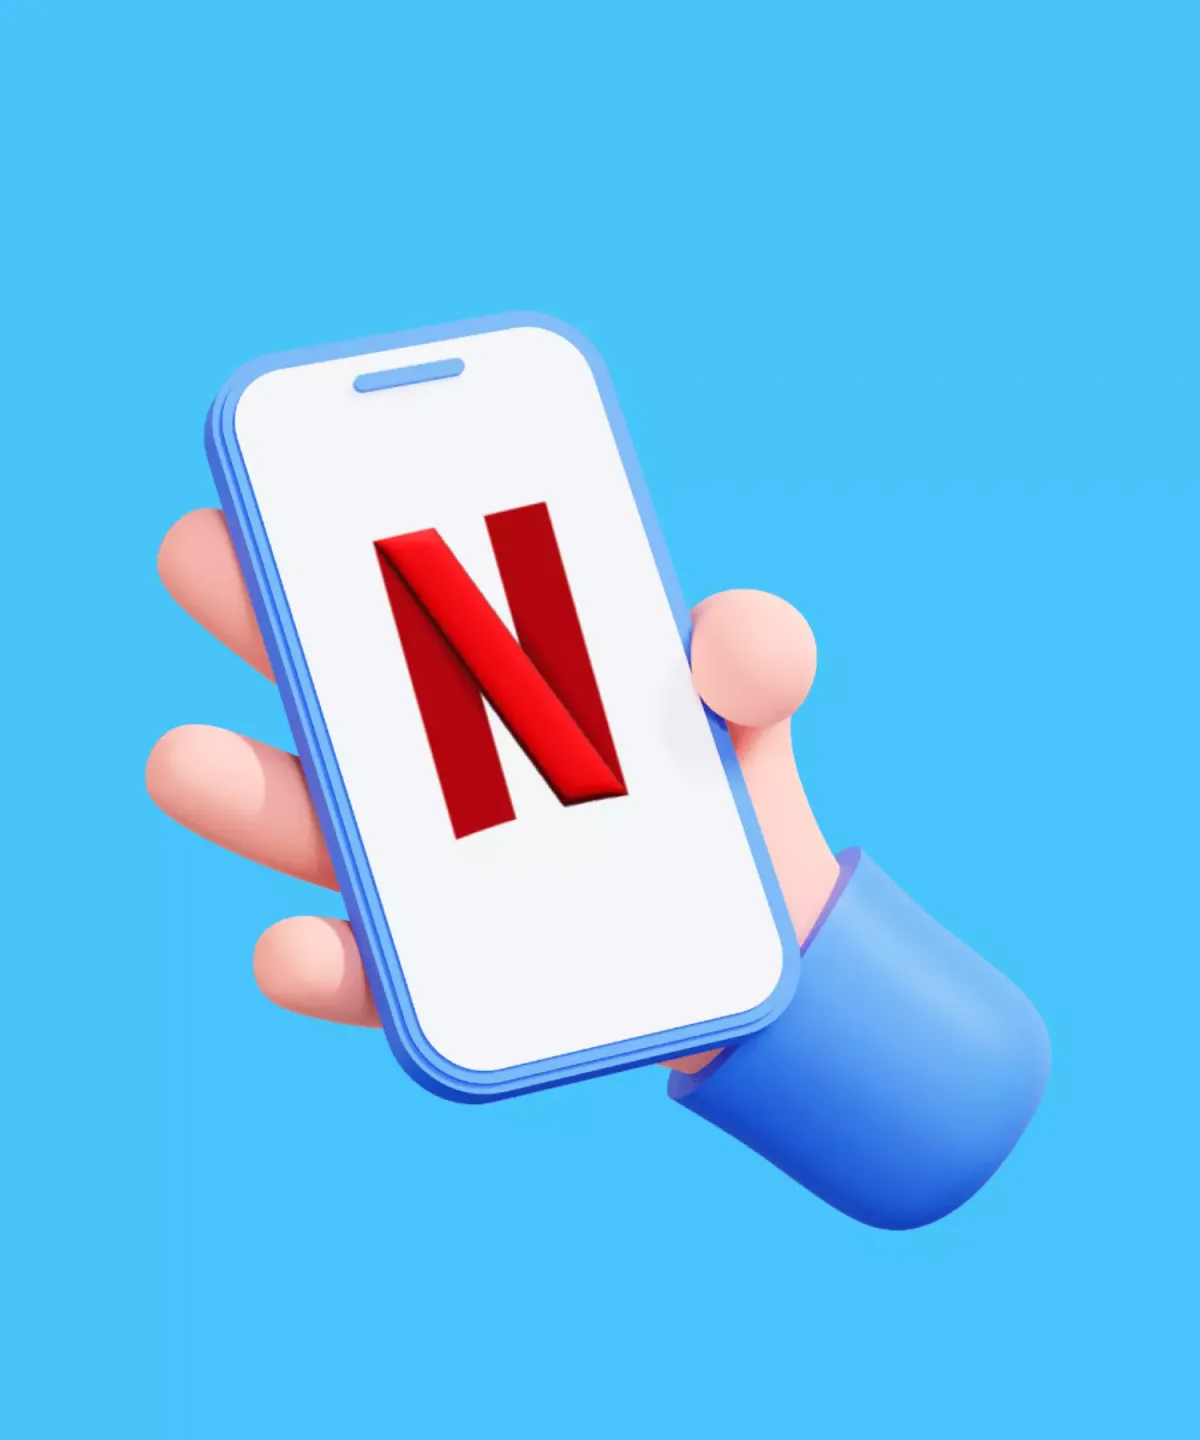 How to Create a Streaming App Like Netflix: Features, Cost and More